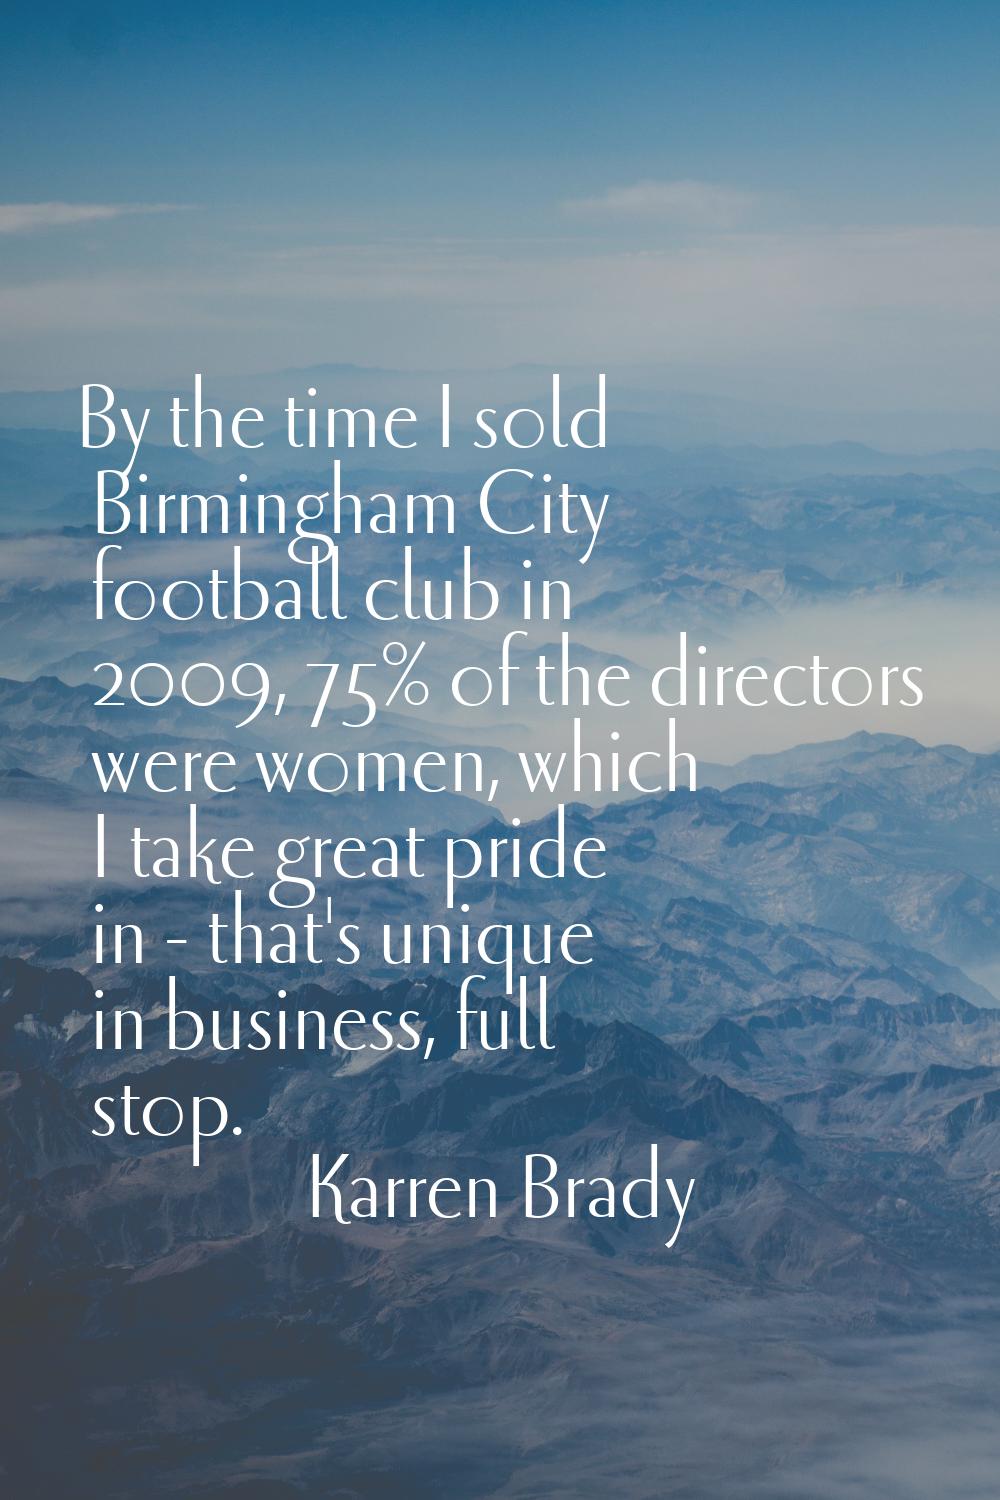 By the time I sold Birmingham City football club in 2009, 75% of the directors were women, which I 